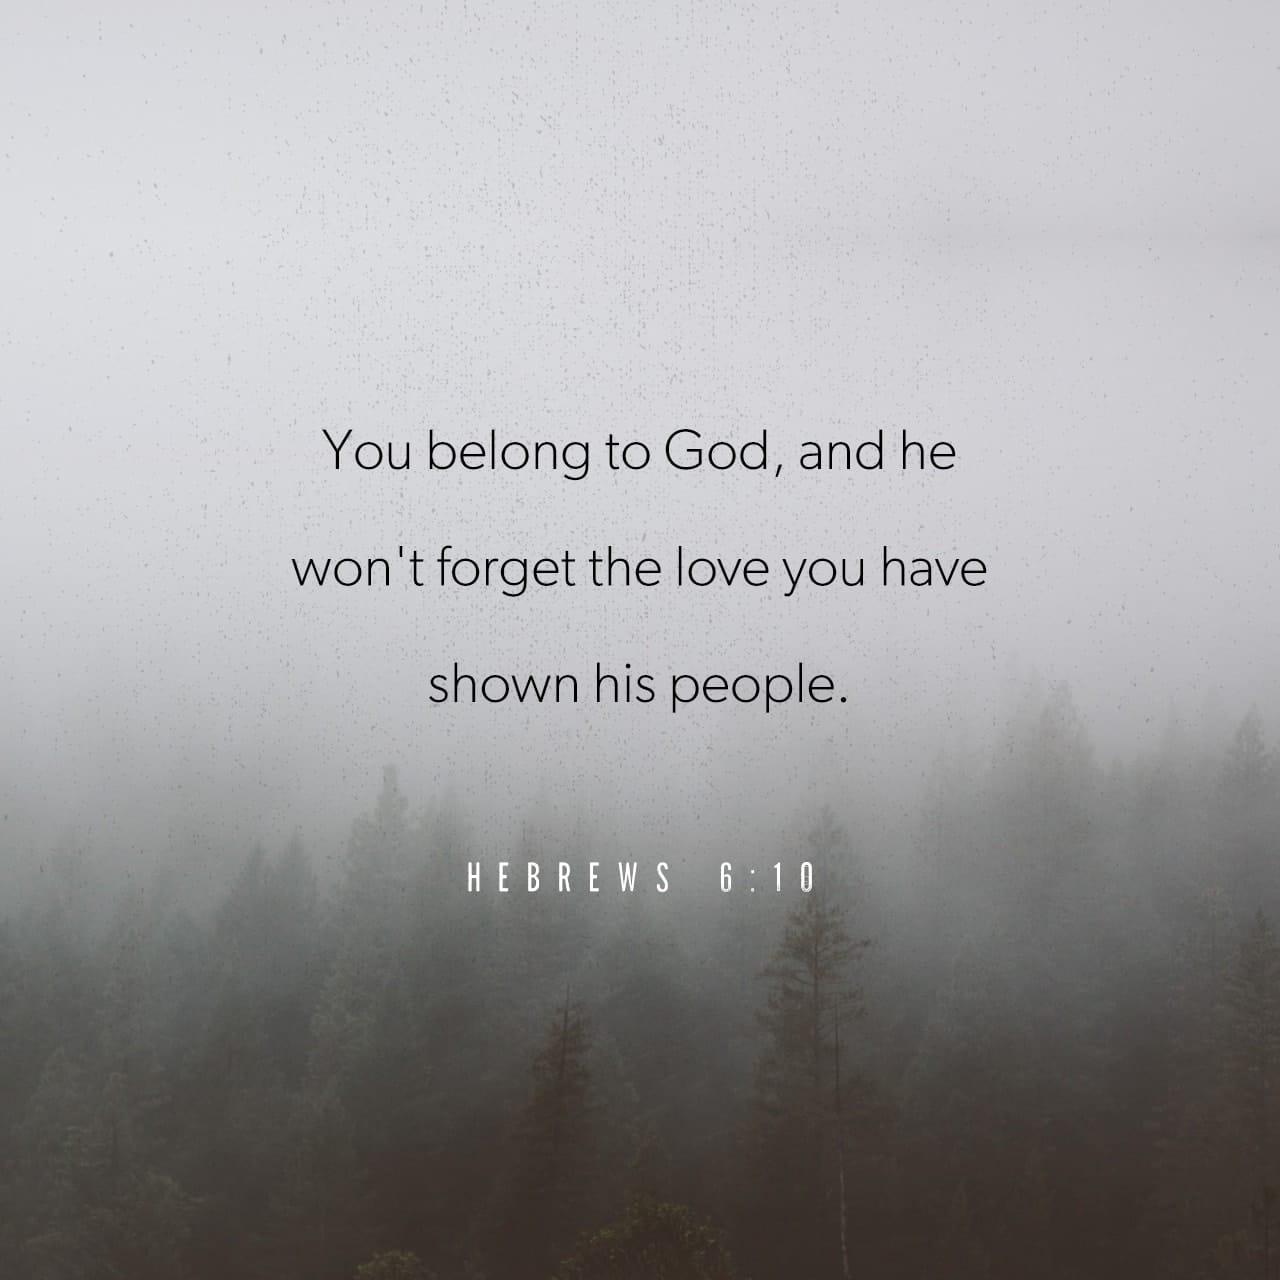 Bible Verse of the Day - day 84 - image 1761 (Hebrews 6:1-12)